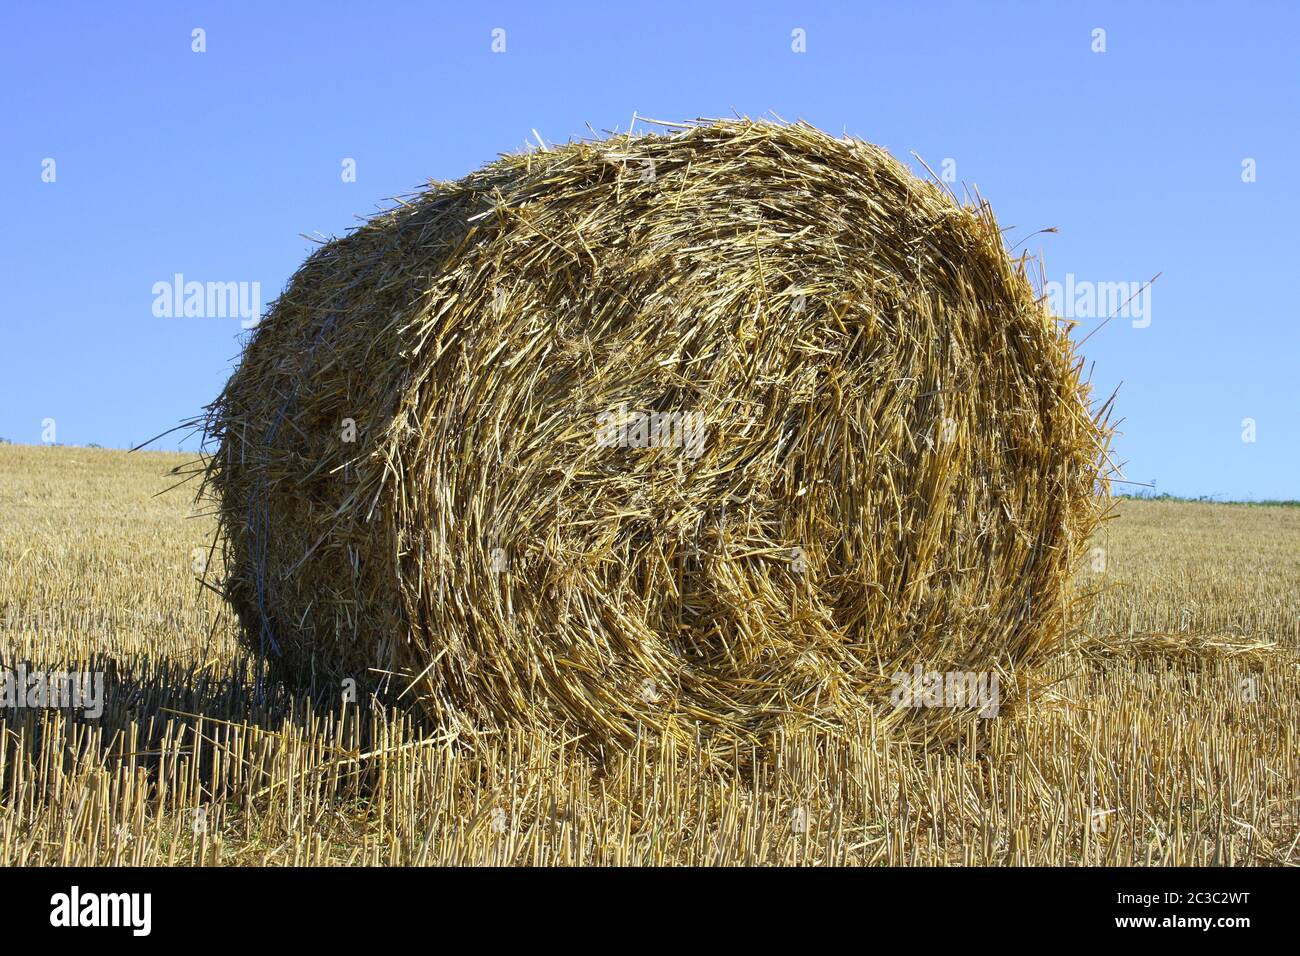 Large round straw roll with blue sky in background Stock Photo